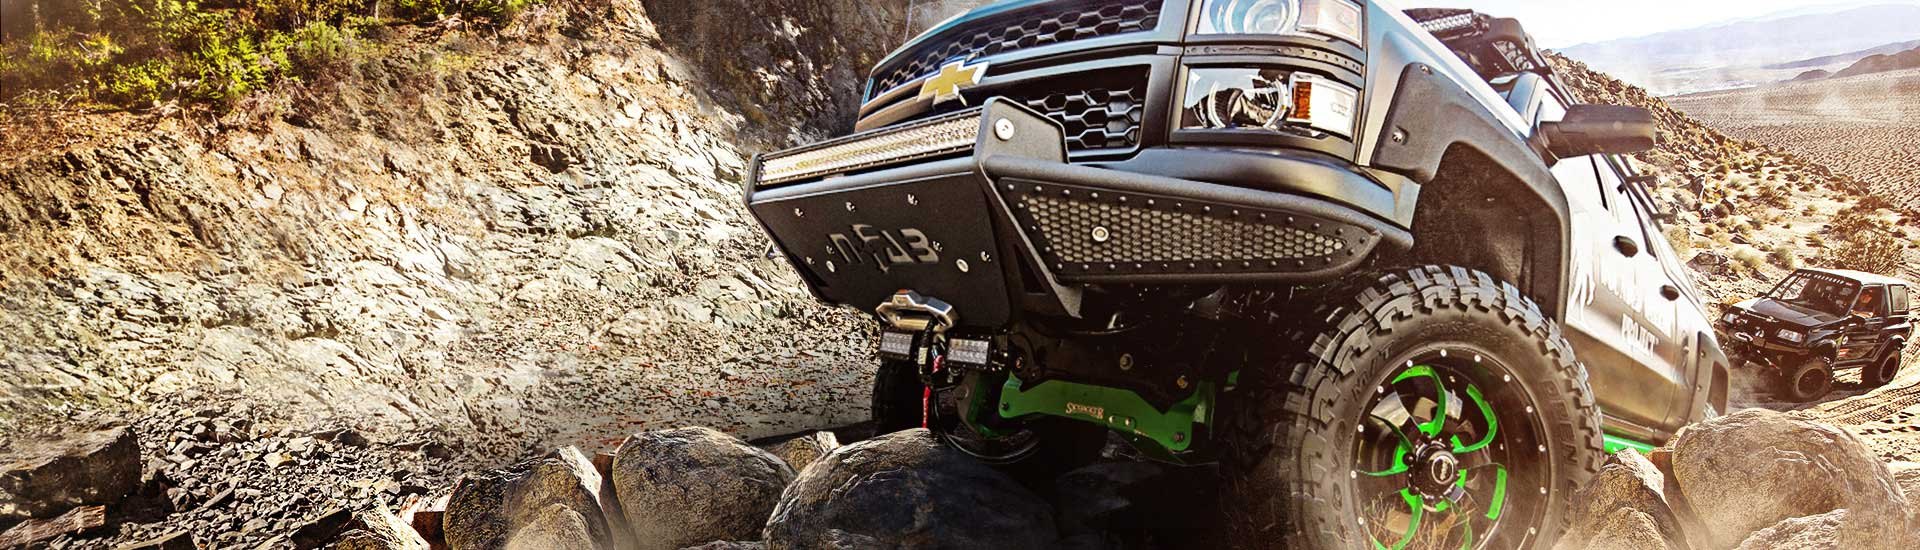 Ford Ranger Aftermarket Parts & Accessories - Best Off Road Parts & 4X4  Services Near You